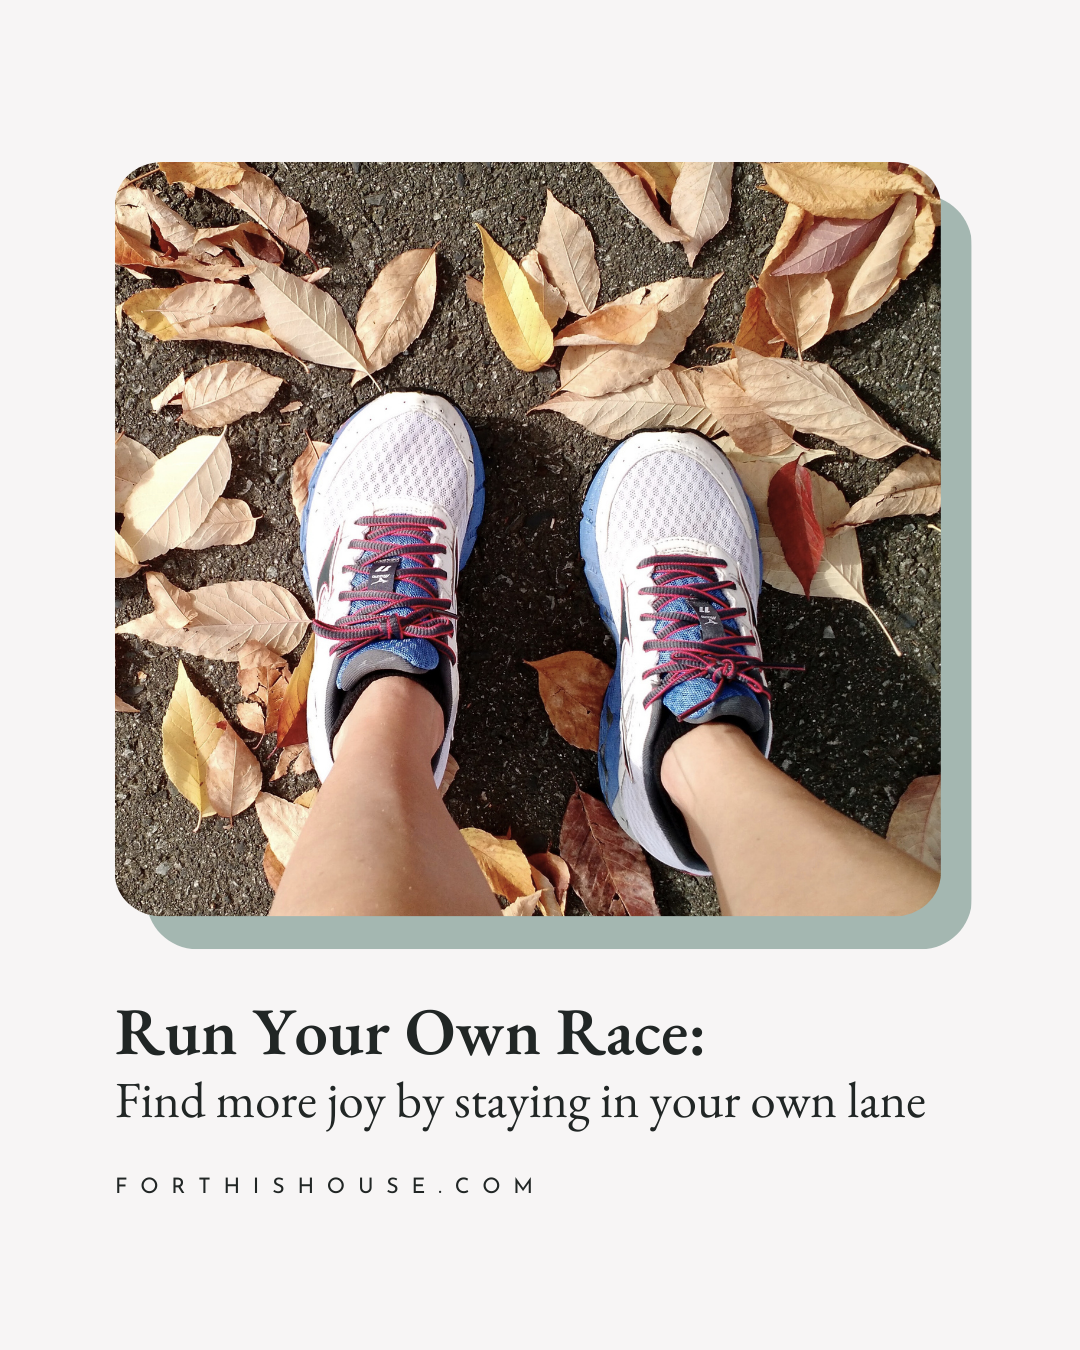 Run Your Own Race: Find more joy by staying in your own lane